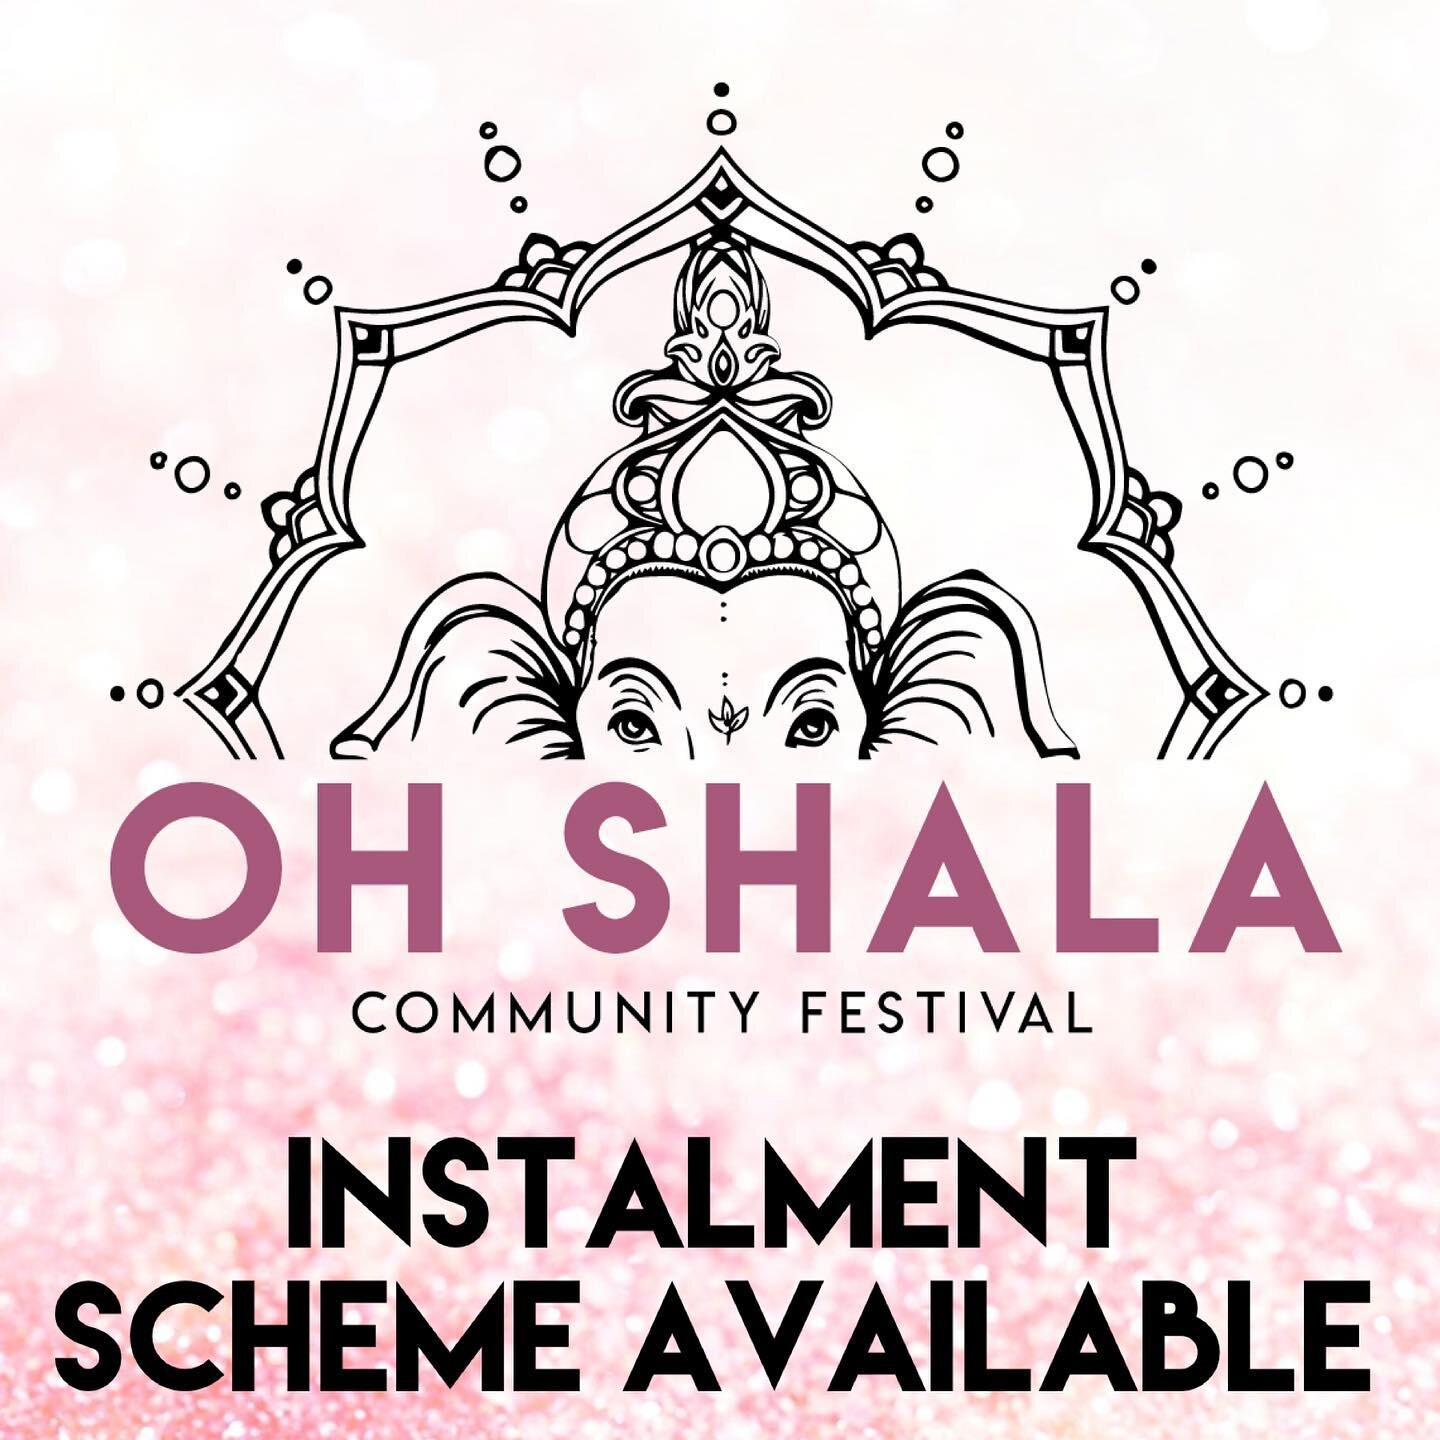 Email us if you&rsquo;d like to pay for your ticket in instalments
.
If you would like to join the festival but worried about finances, please don&rsquo;t let money be a deterrence. Email us and we can help as best as possible!
.
Hello@ohshalafestiva